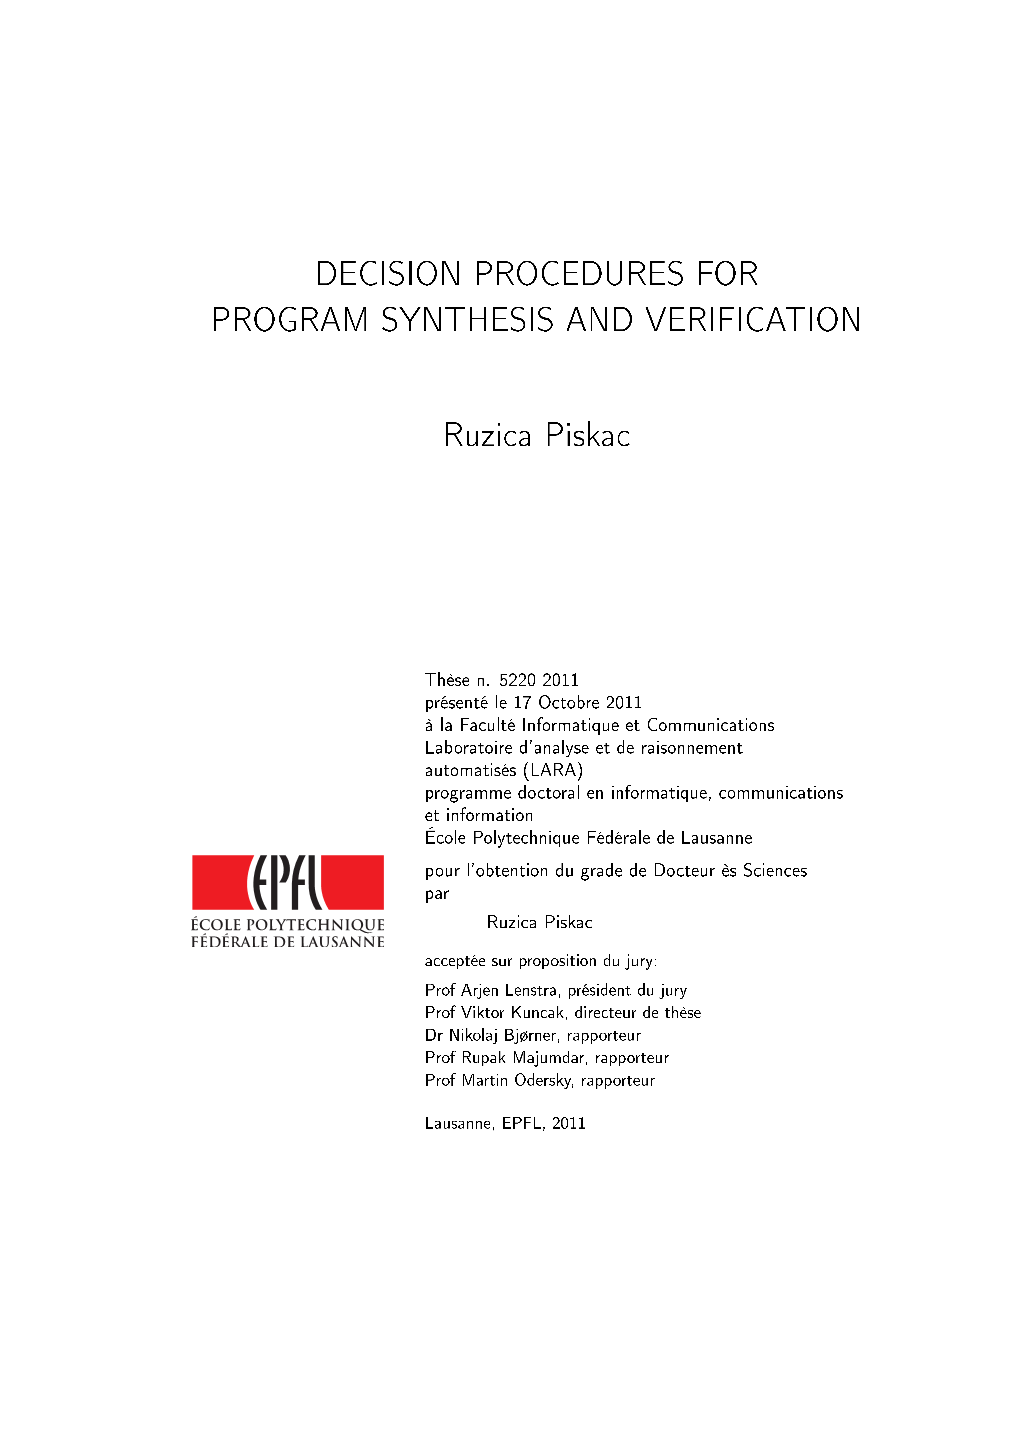 Decision Procedures for Program Synthesis and Verification